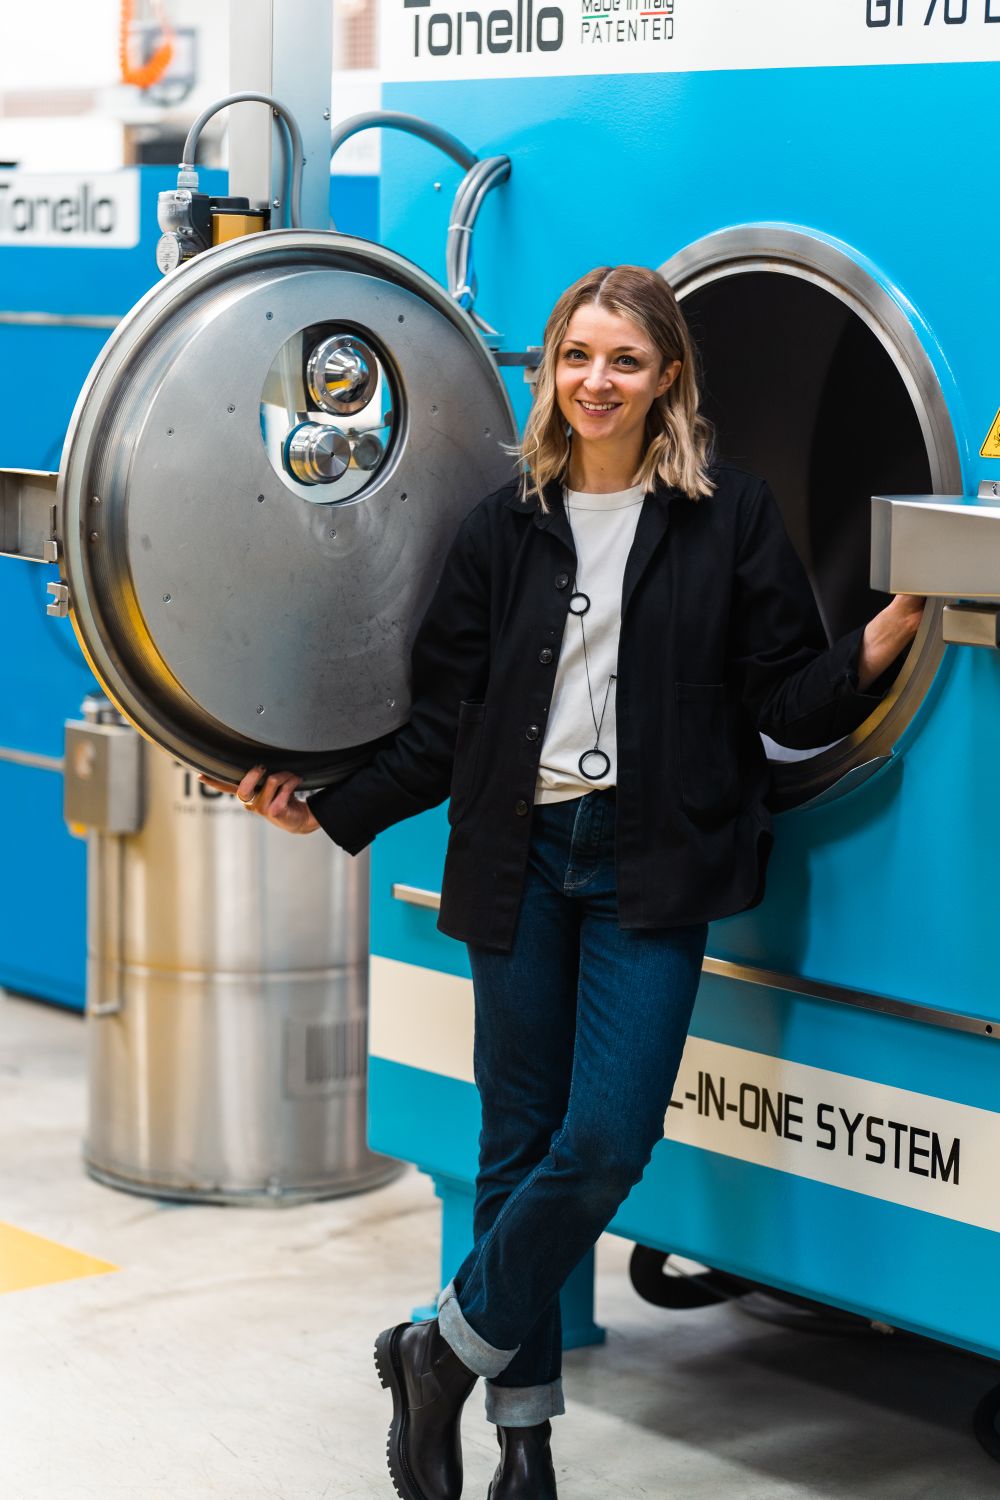 a person is leaning and posing next to a big machine for dying clothes